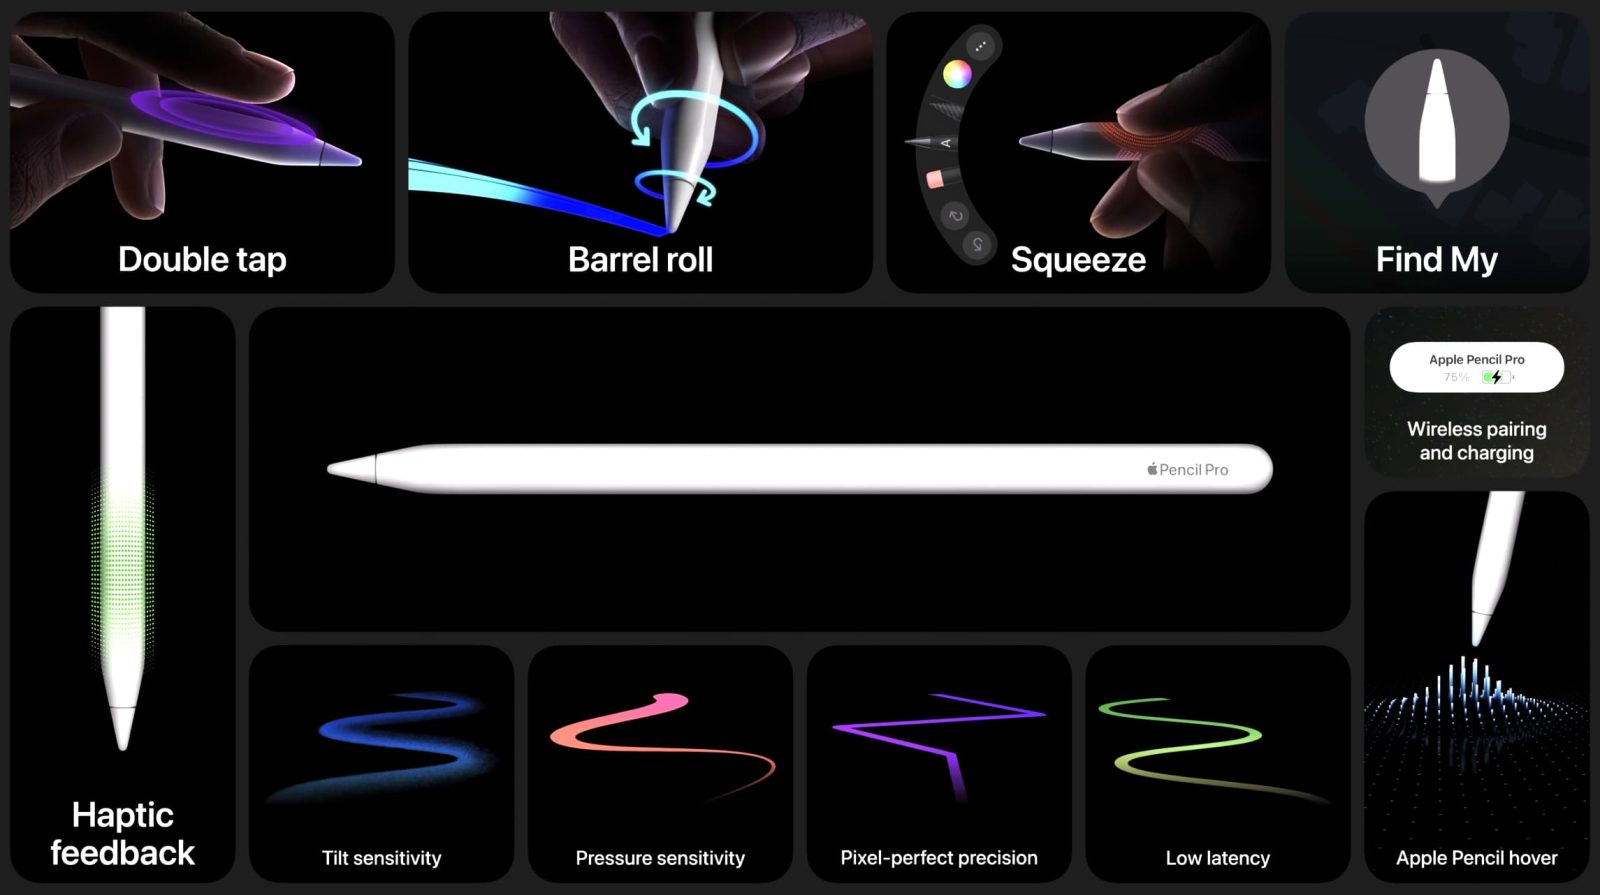 Apple Pencil Pro launches, with squeeze gesture and roll, plus FindMy support